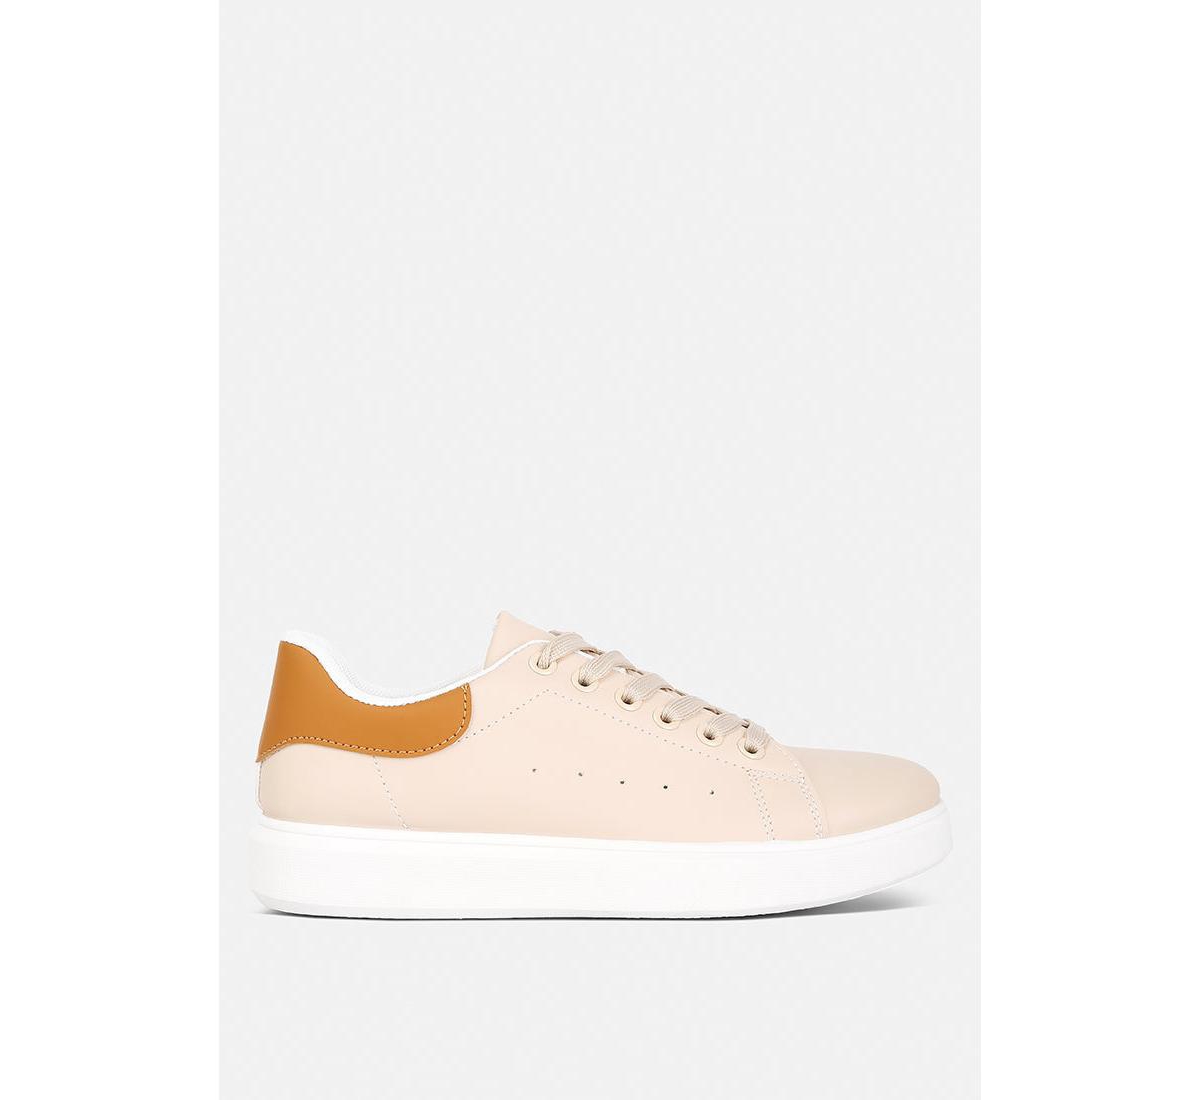 Enora Comfortable Lace Up Sneakers - Beige